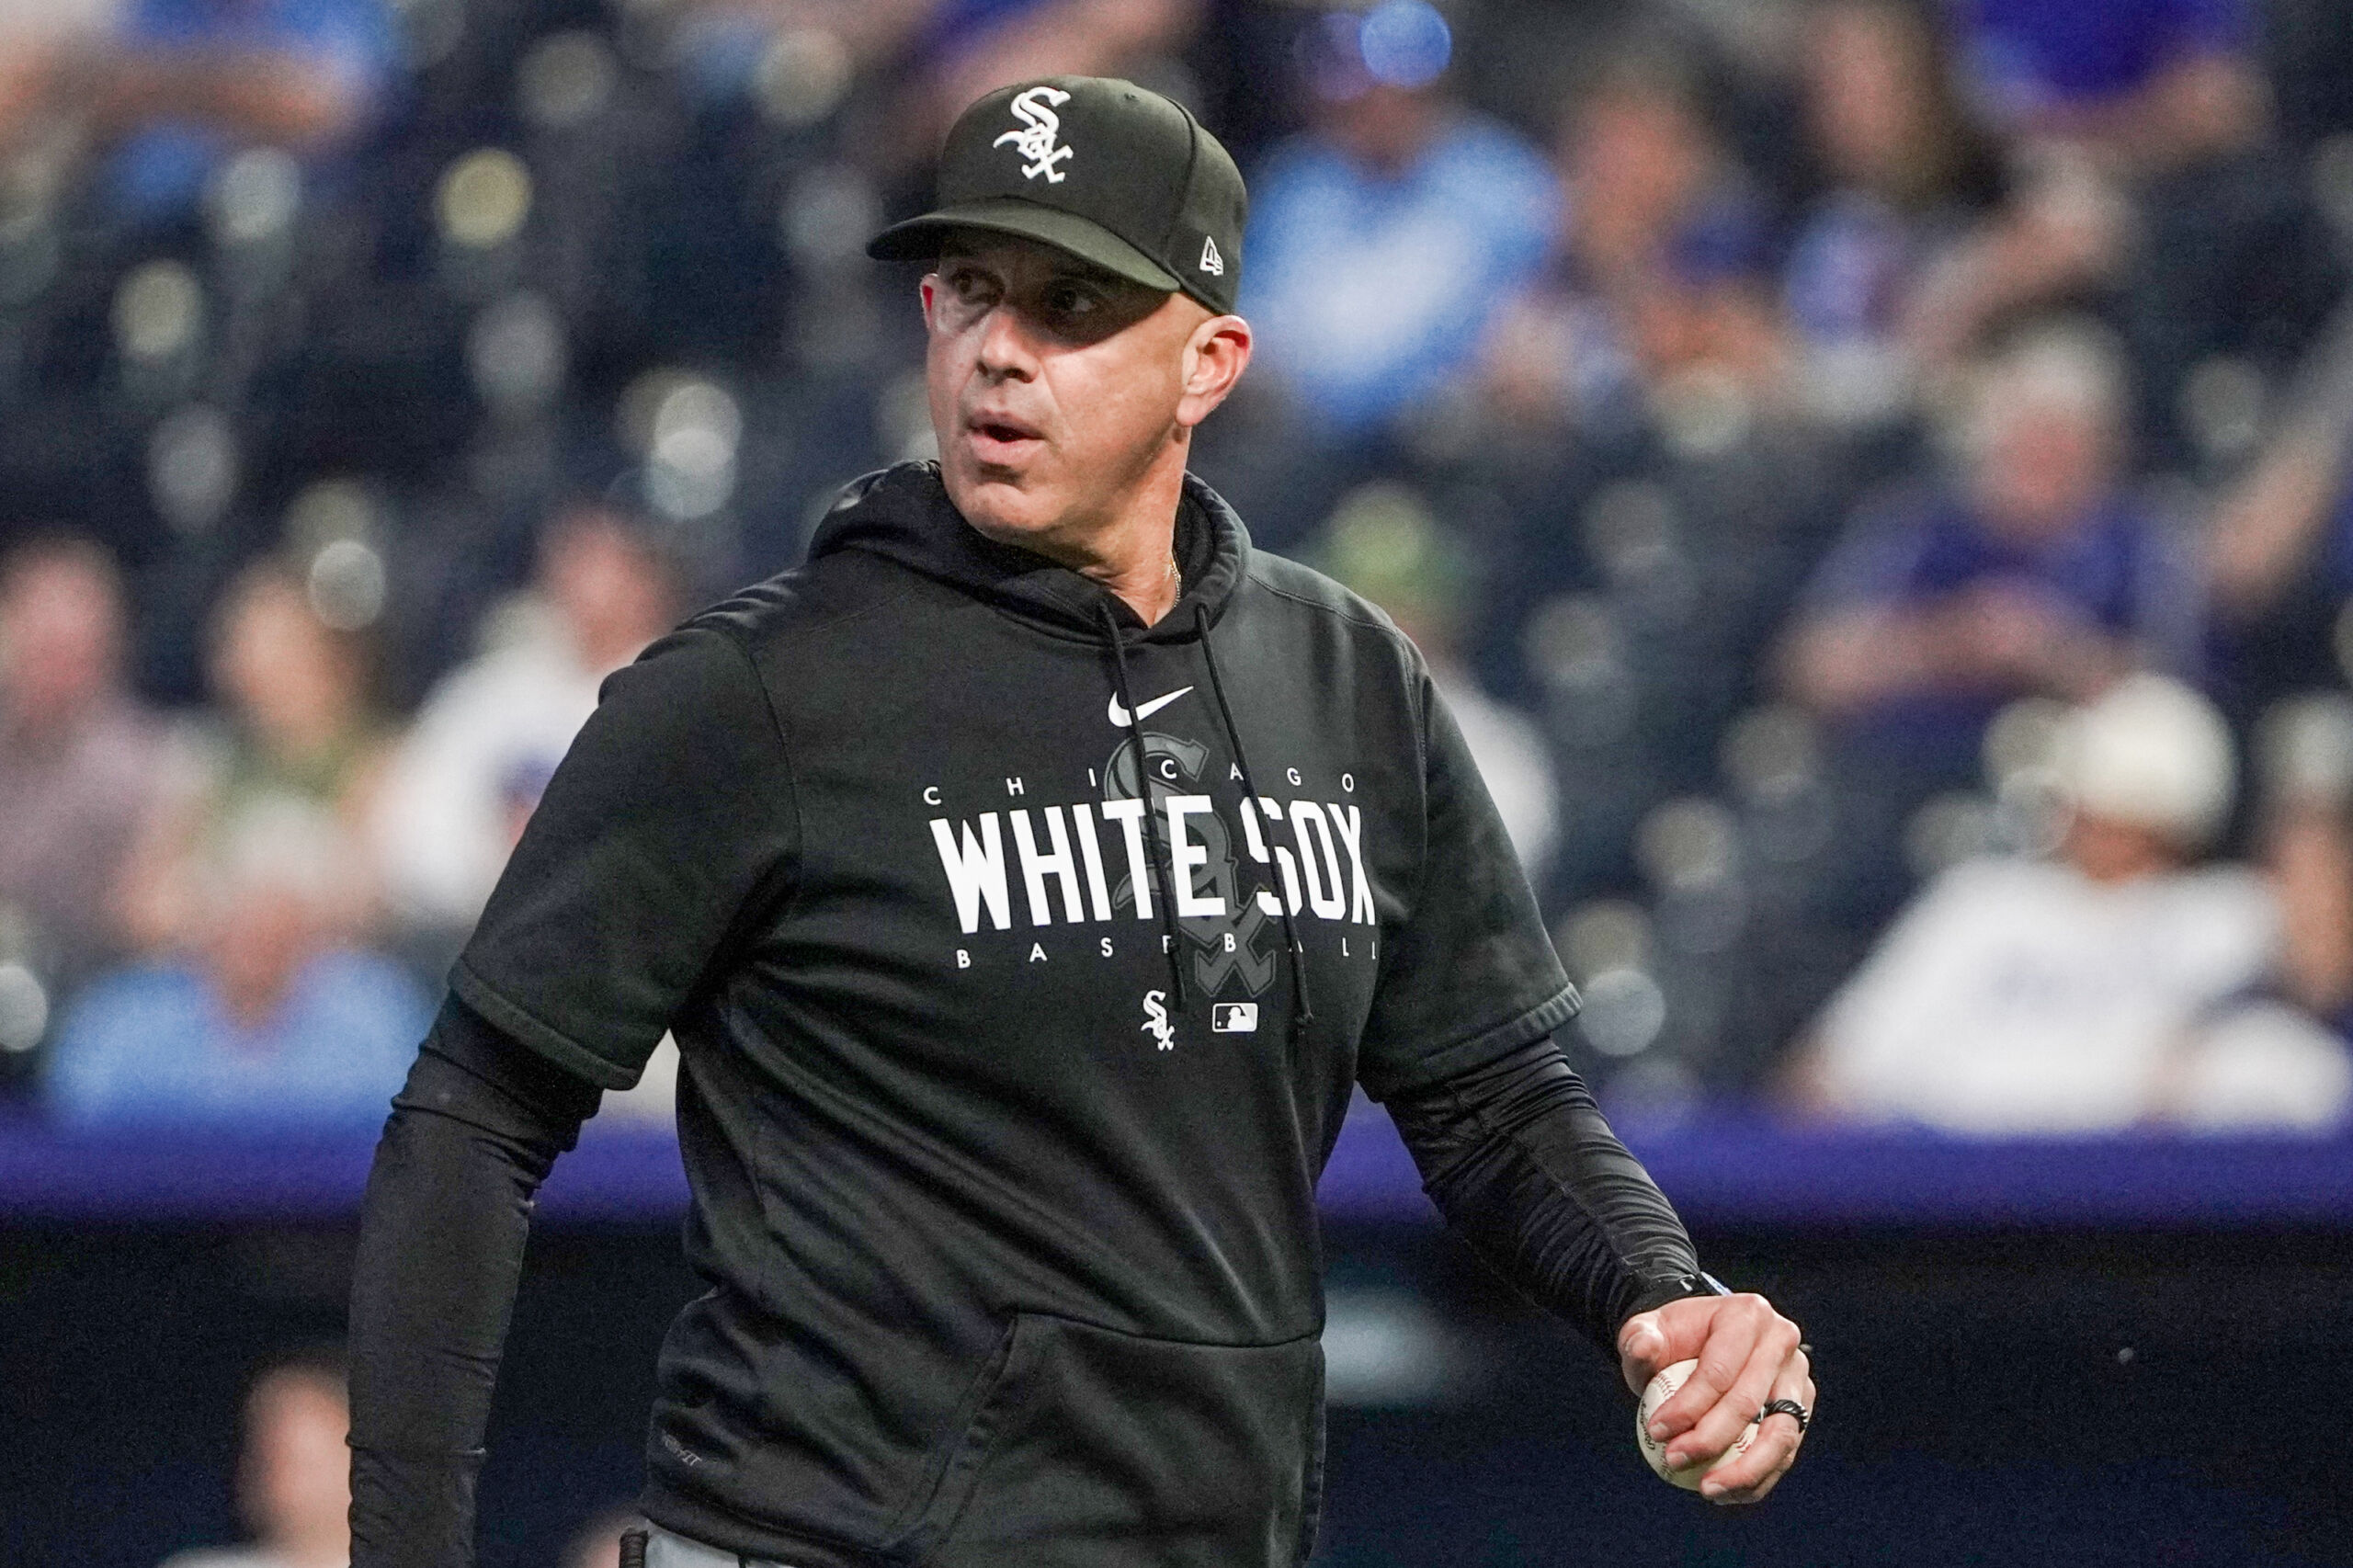 Chicago White Sox updated their cover - Chicago White Sox